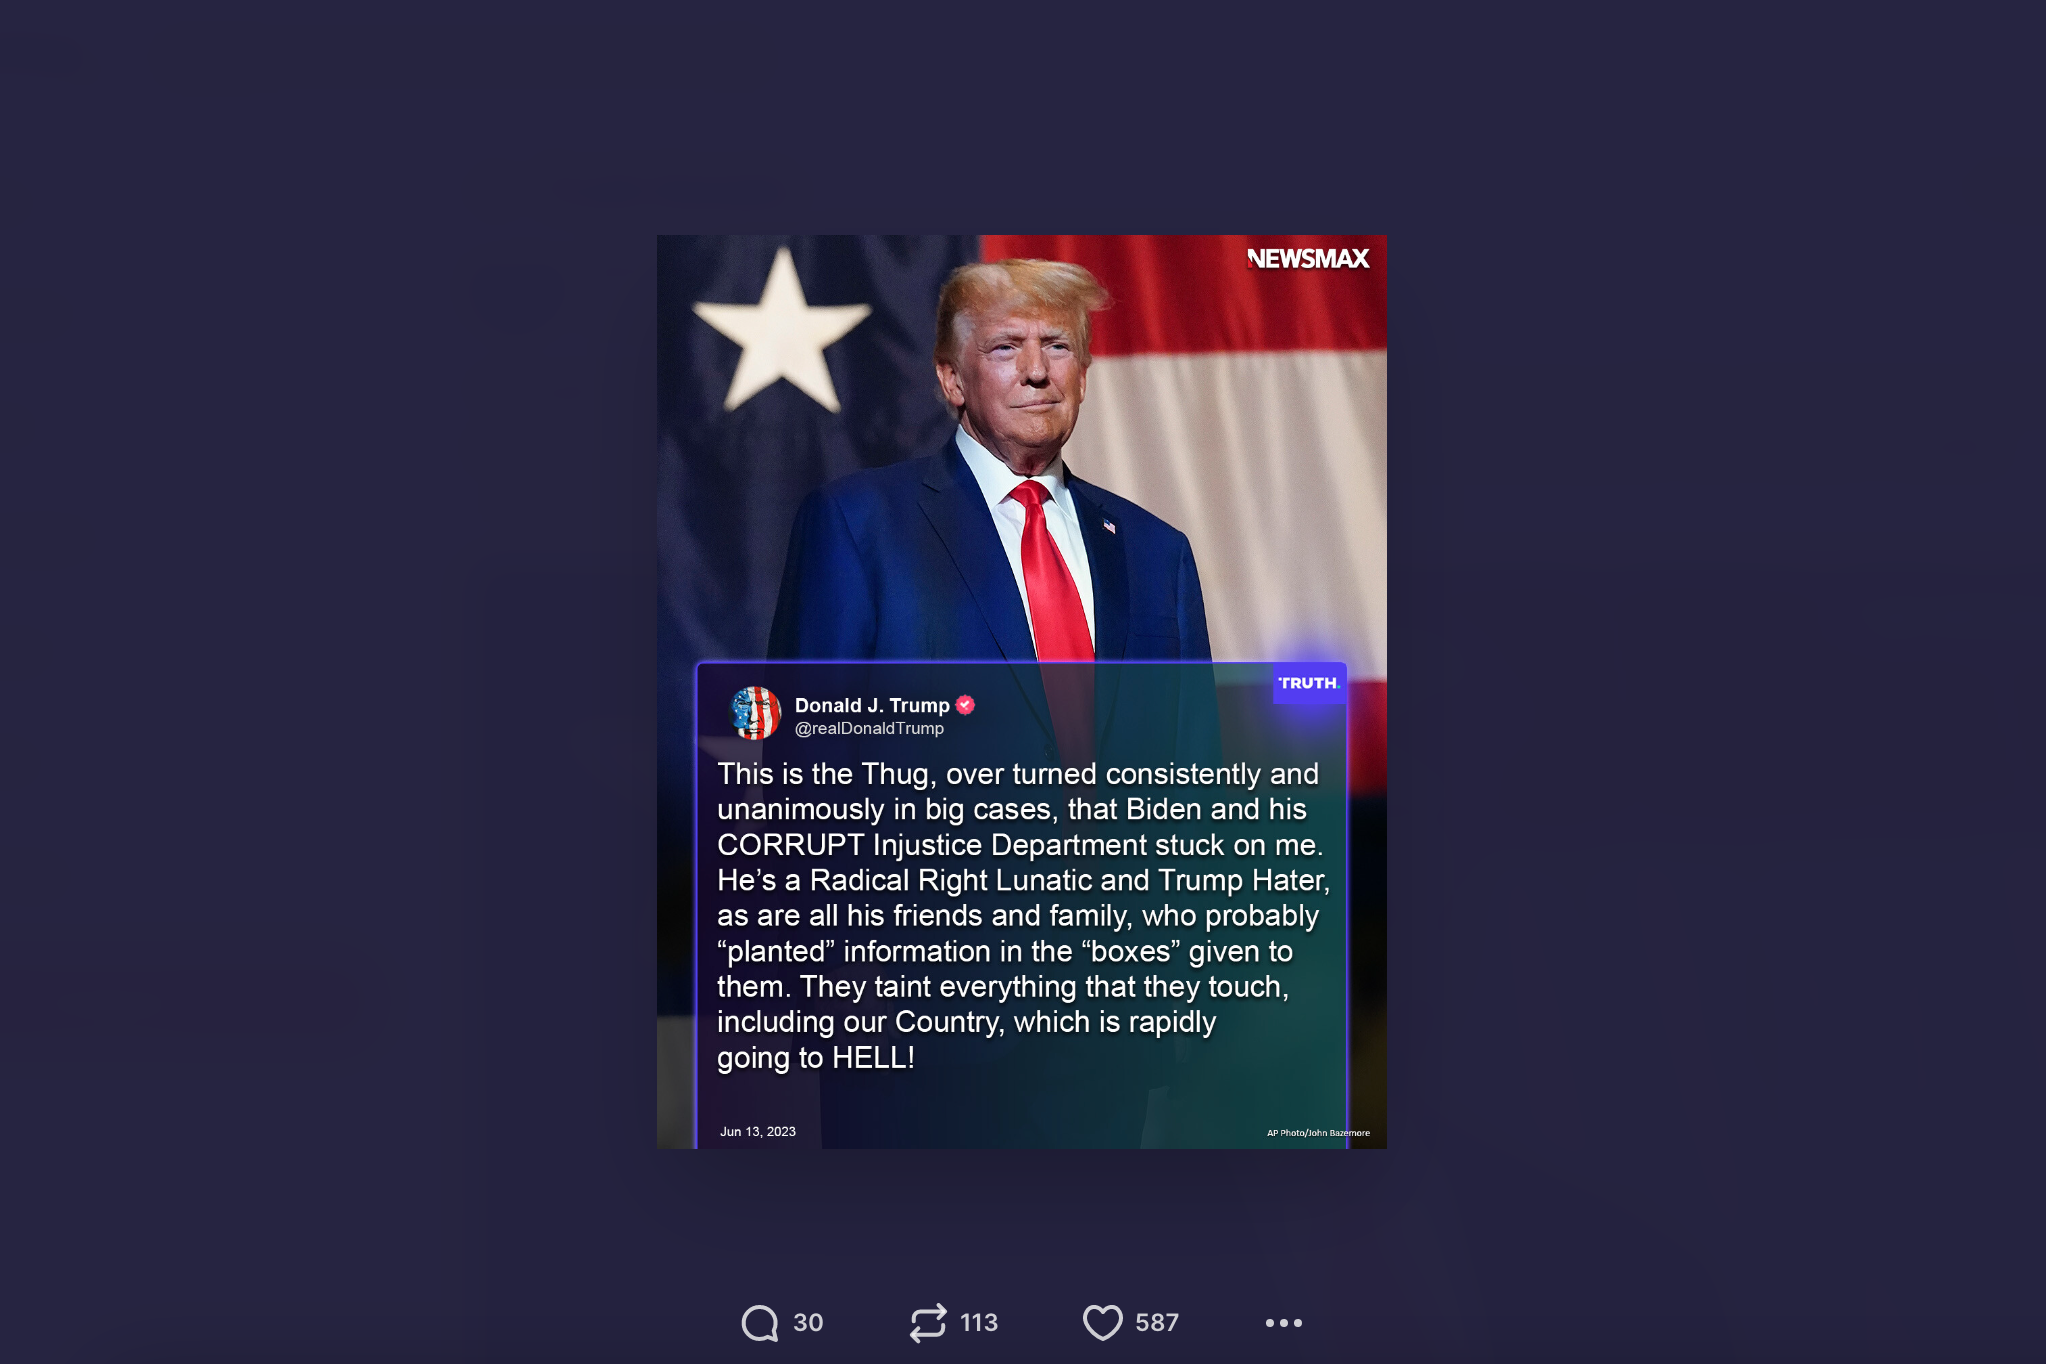 A Neswmax image of Trump in front of a U.S. flag and slightly obscured by a screencap of one of his Truths about Jack Smith